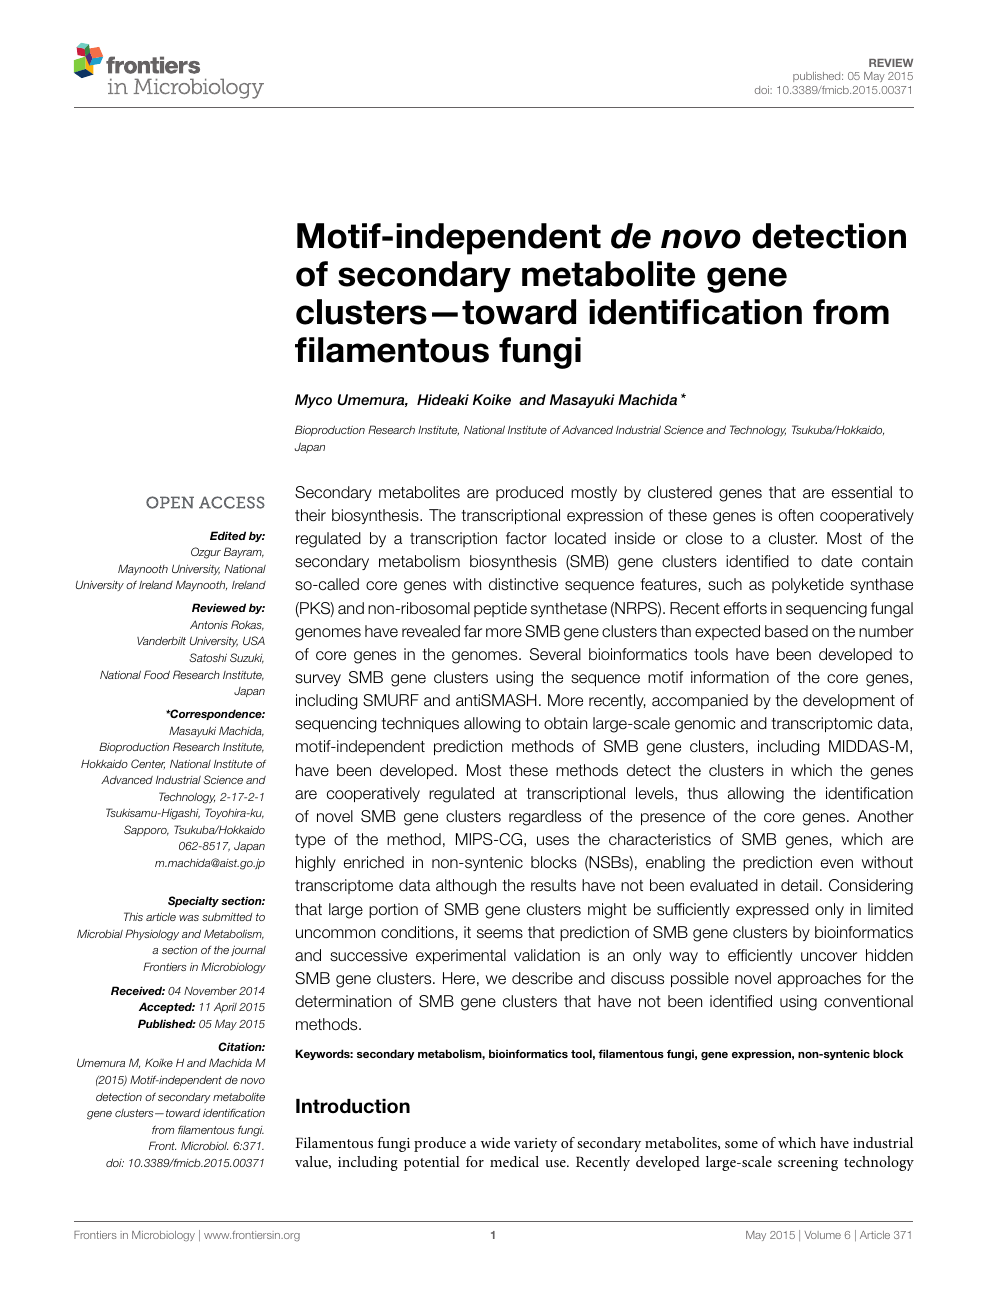 Motif Independent De Novo Detection Of Secondary Metabolite Gene Clusters Toward Identification From Filamentous Fungi Topic Of Research Paper In Biological Sciences Download Scholarly Article Pdf And Read For Free On Cyberleninka Open